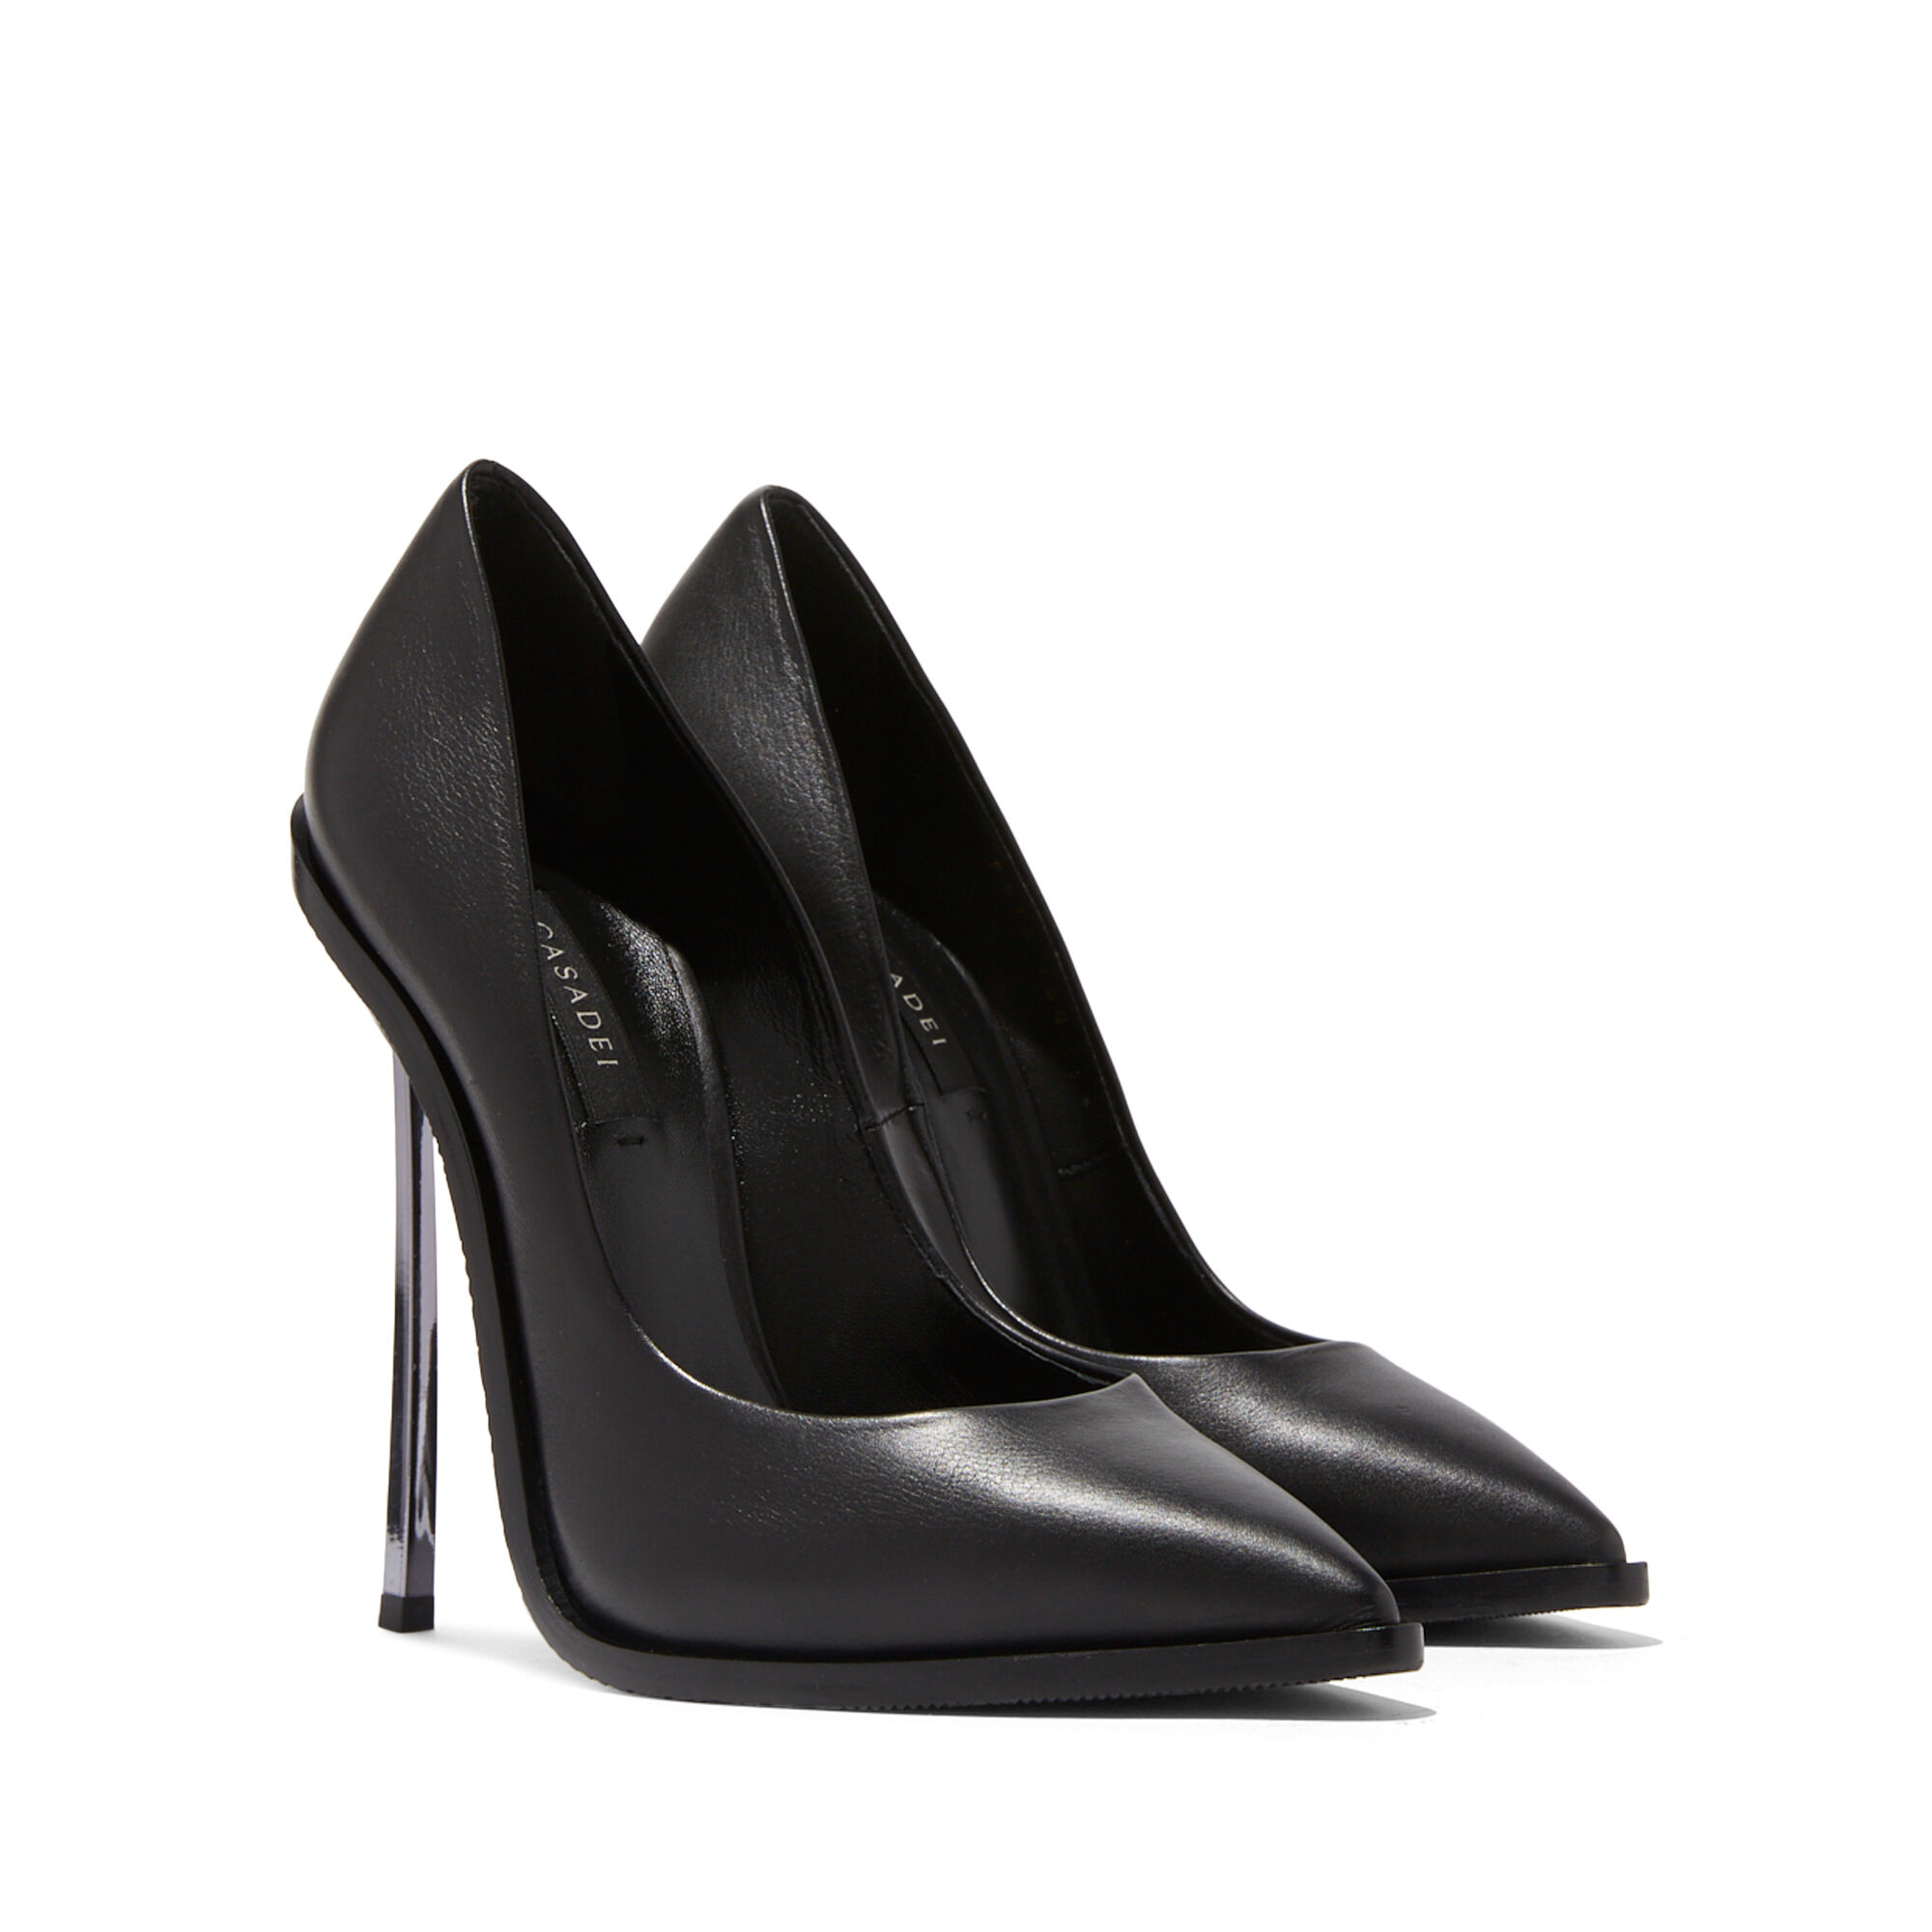 Maxi Blade Pumps and Slingback in Black for Women | Casadei®